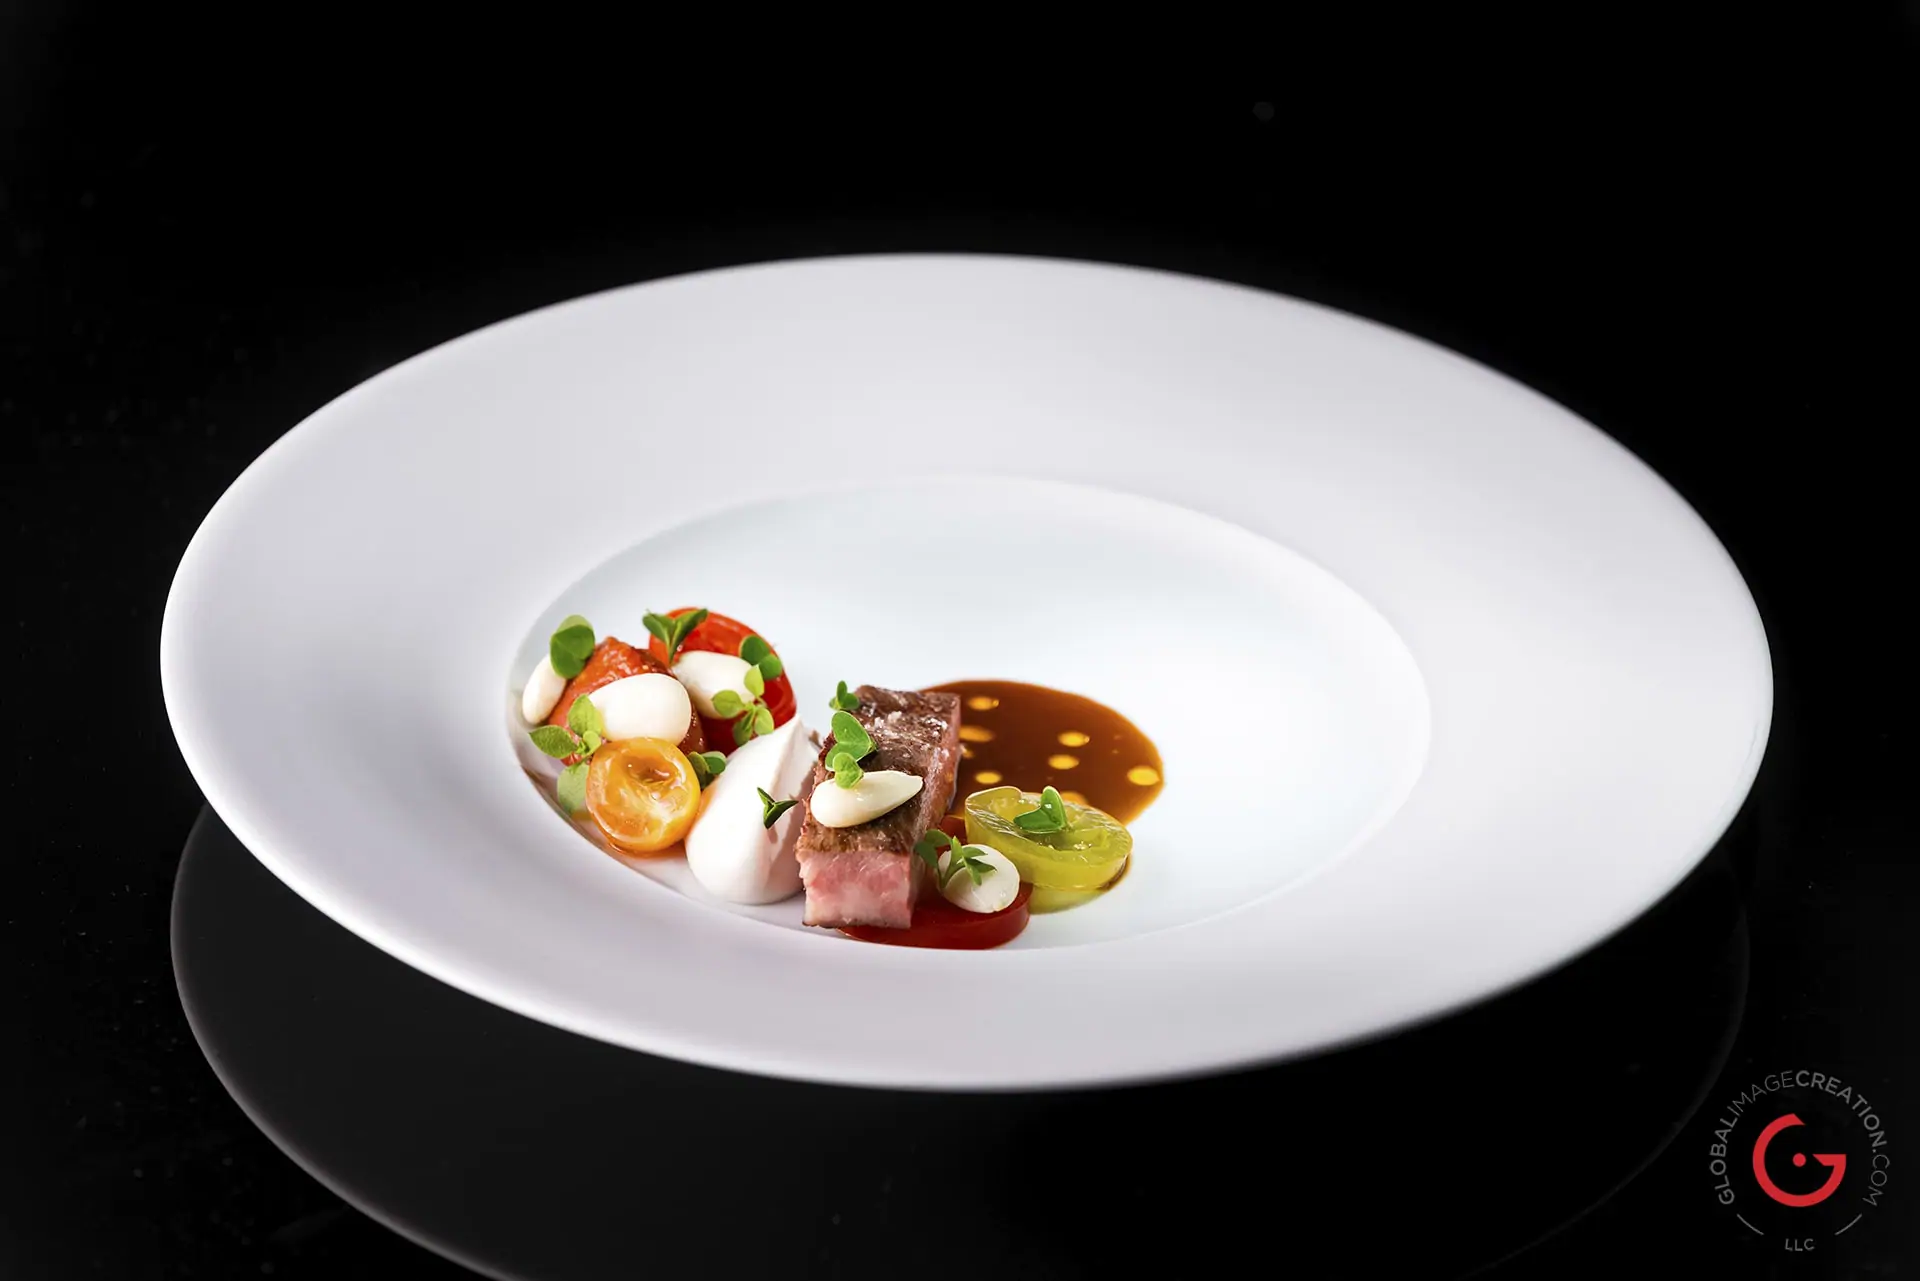 Culinary Photography With Two Michelin Star Chef Sven Wassmer 7132 Silver - Best Chefs in The World